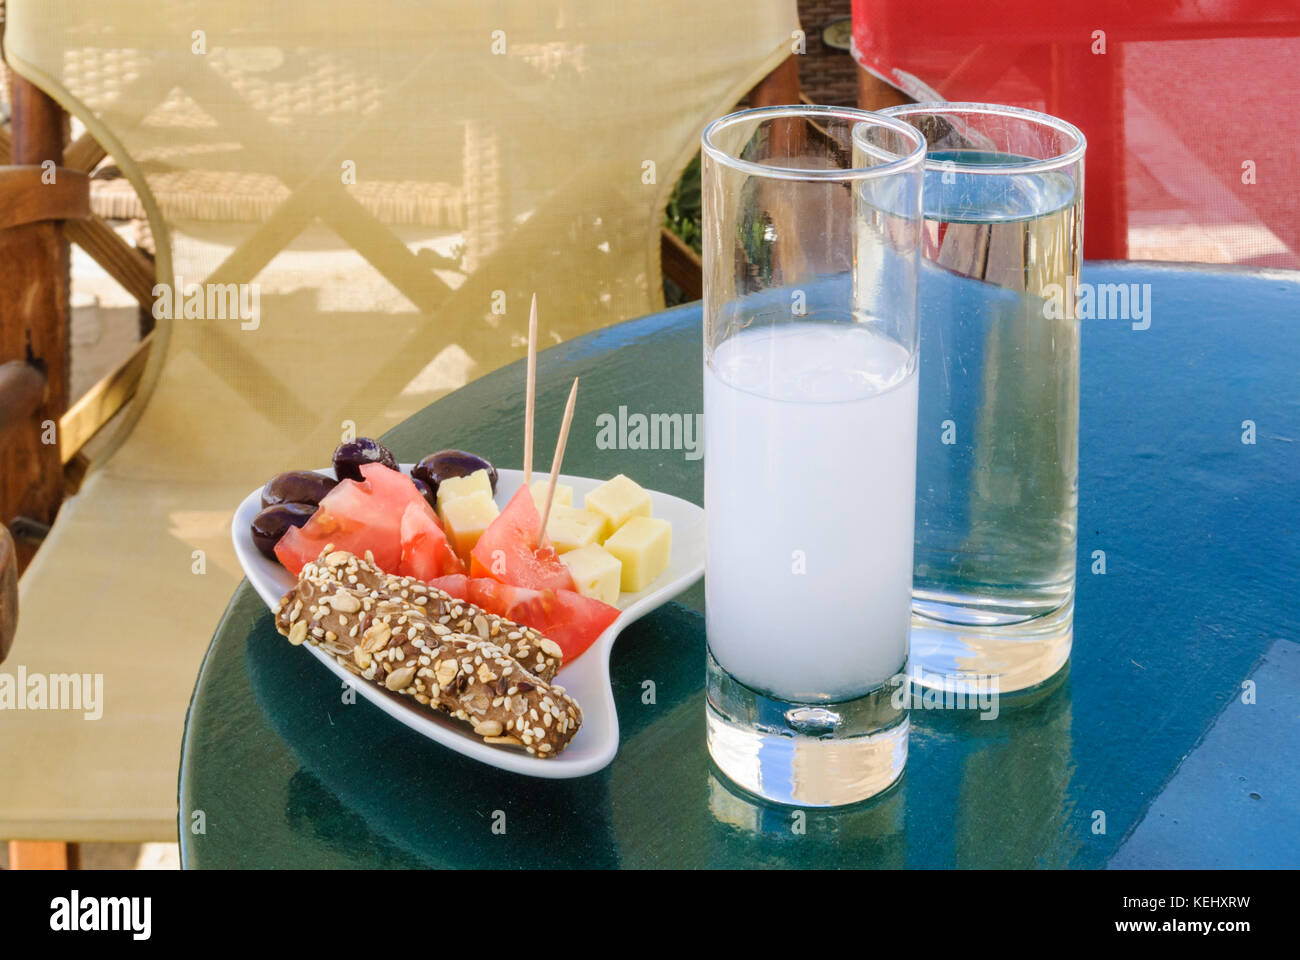 Glass of ouzo and meze plate on a table in Greece Stock Photo